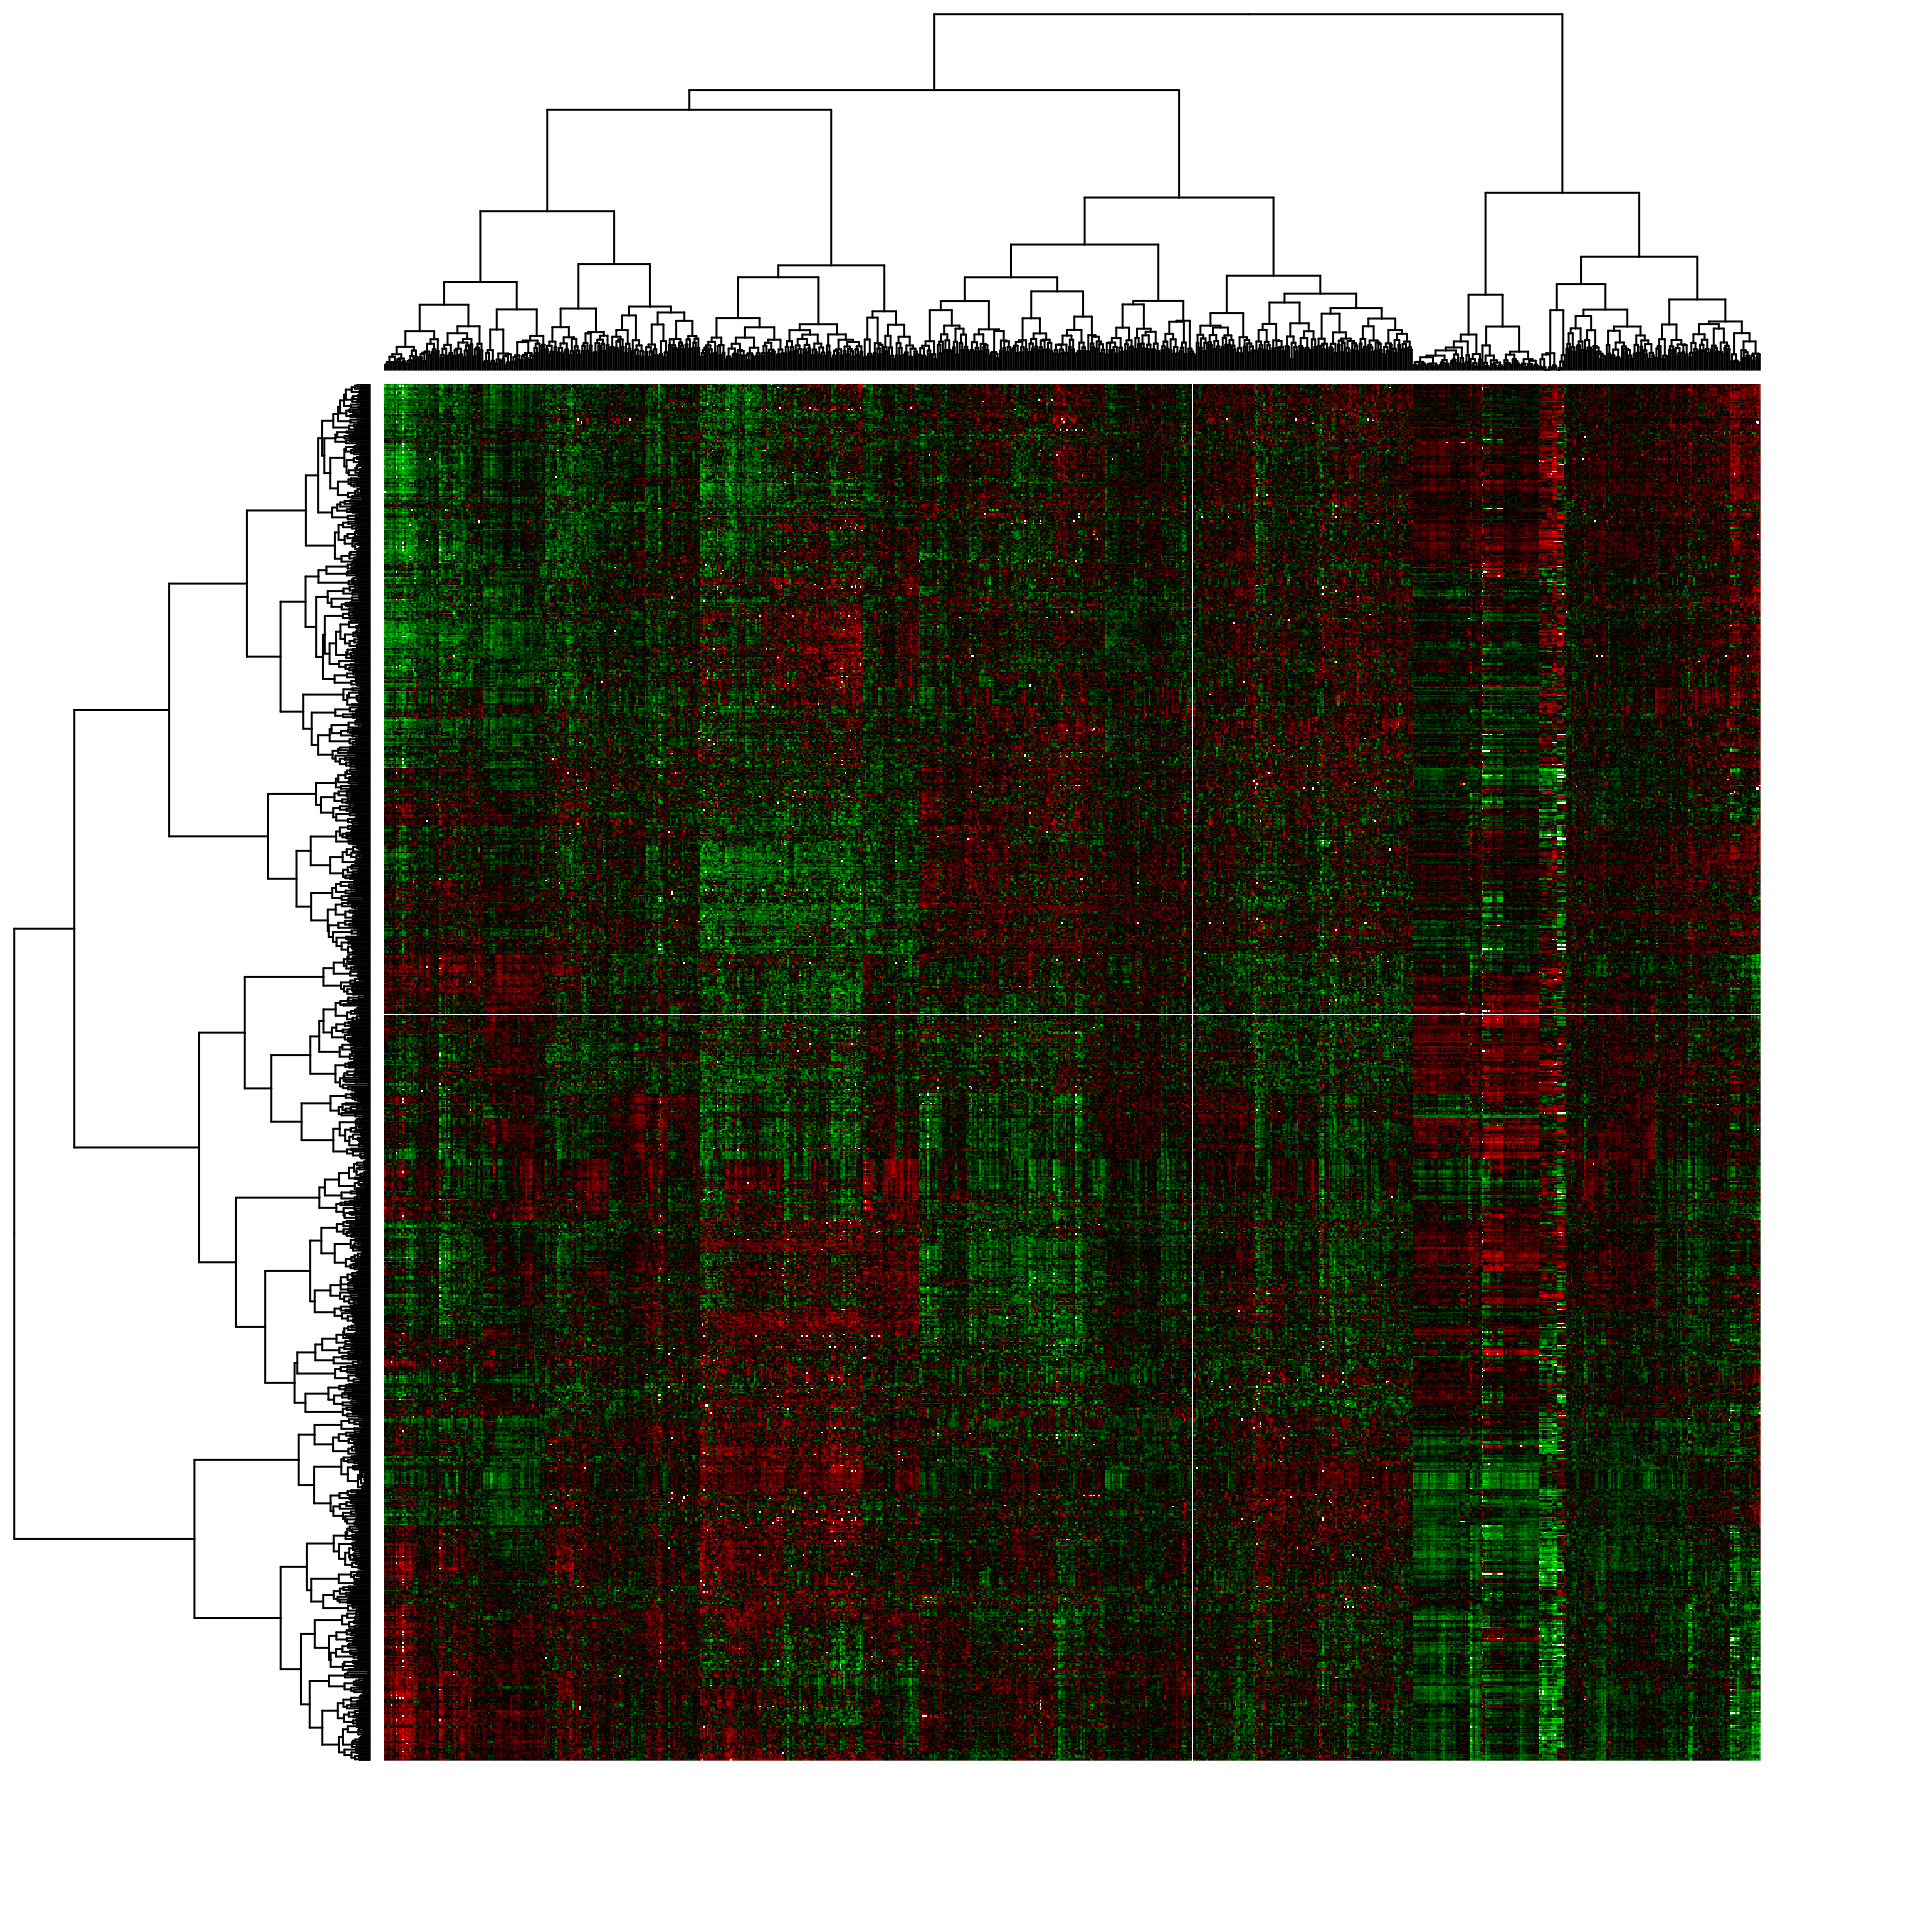 Heat map of the expression matrix clustered by genes (rows) and samples (columns).